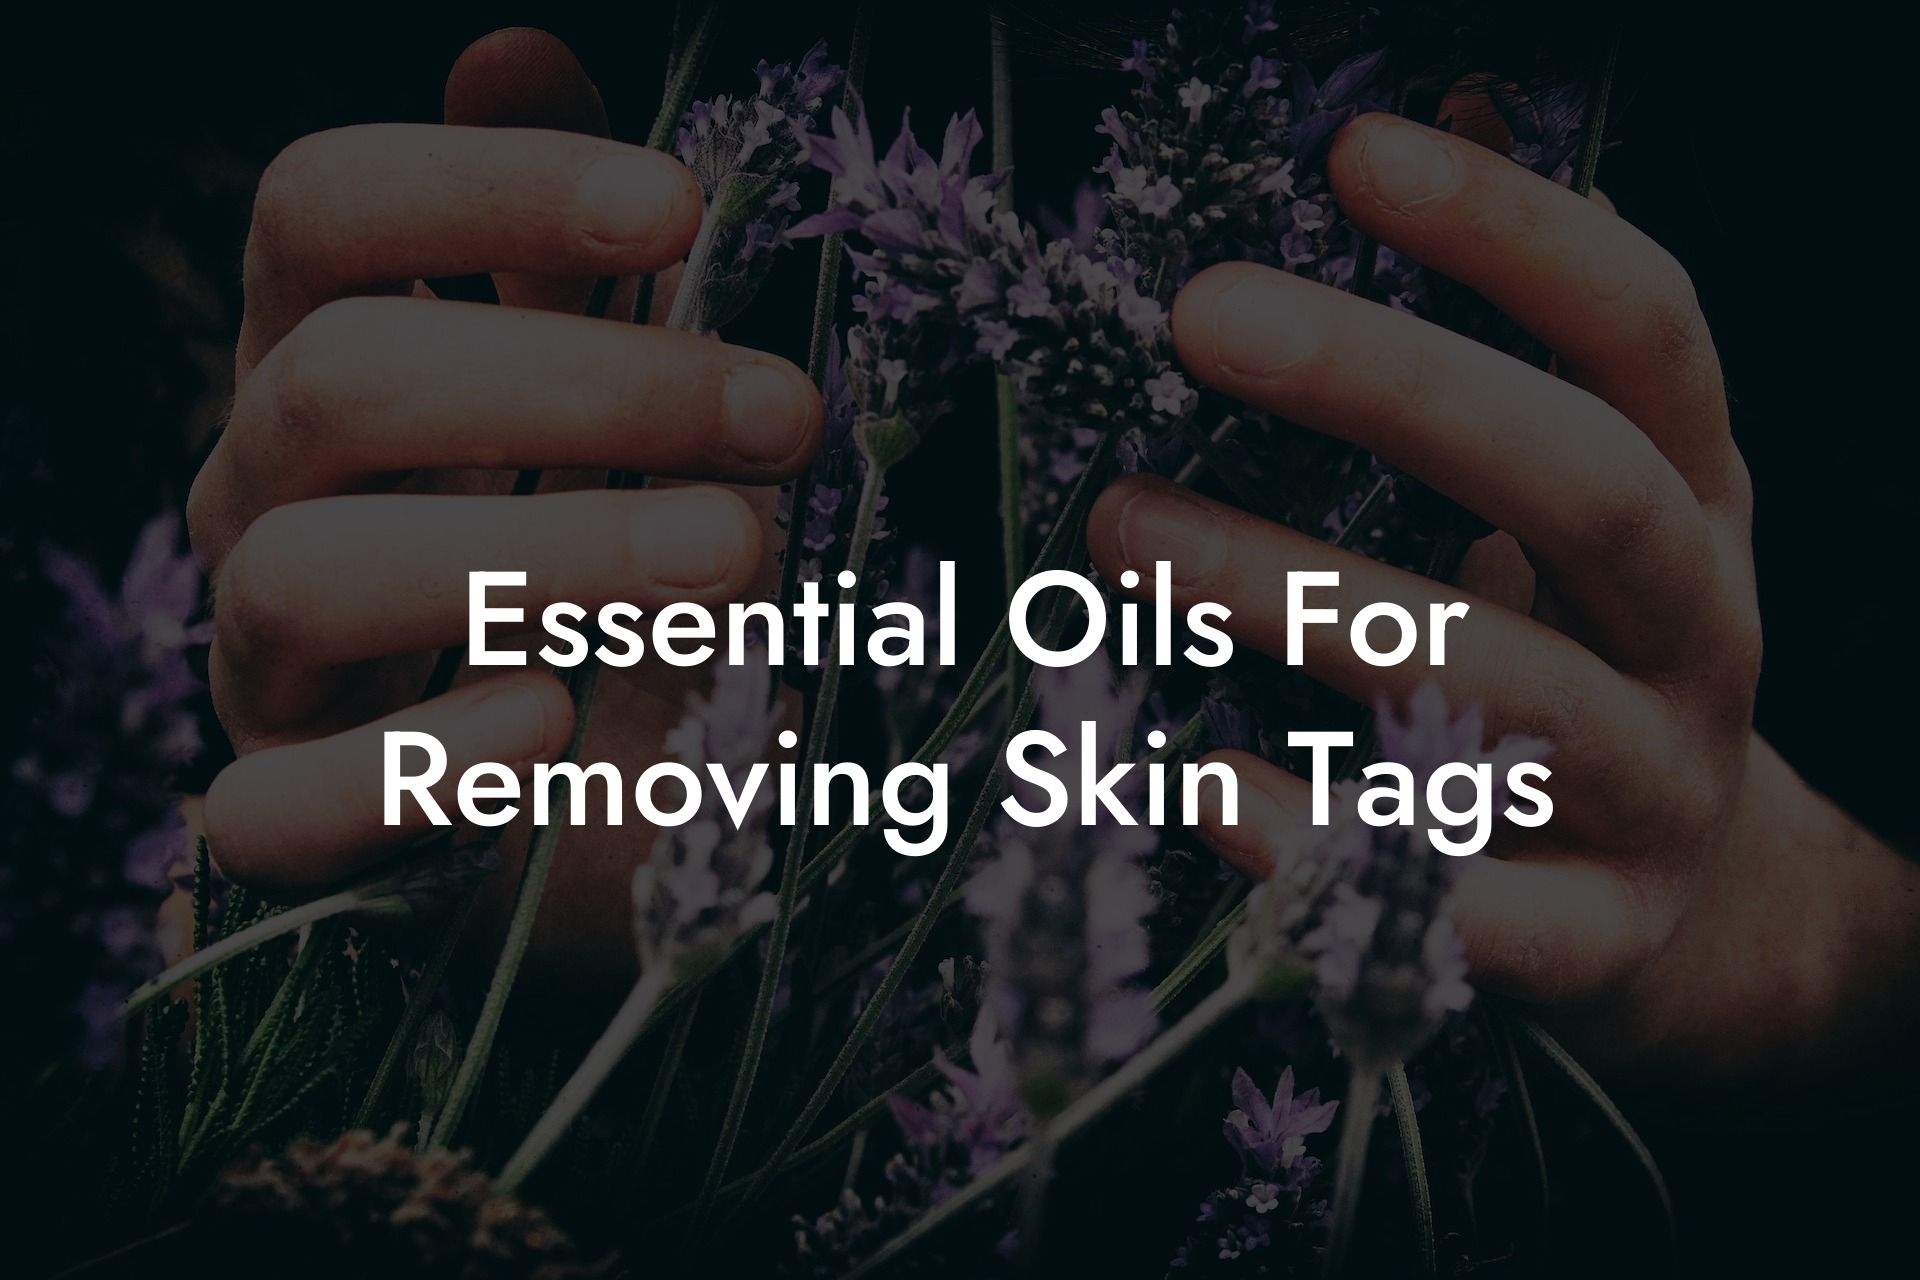 Essential Oils For Removing Skin Tags